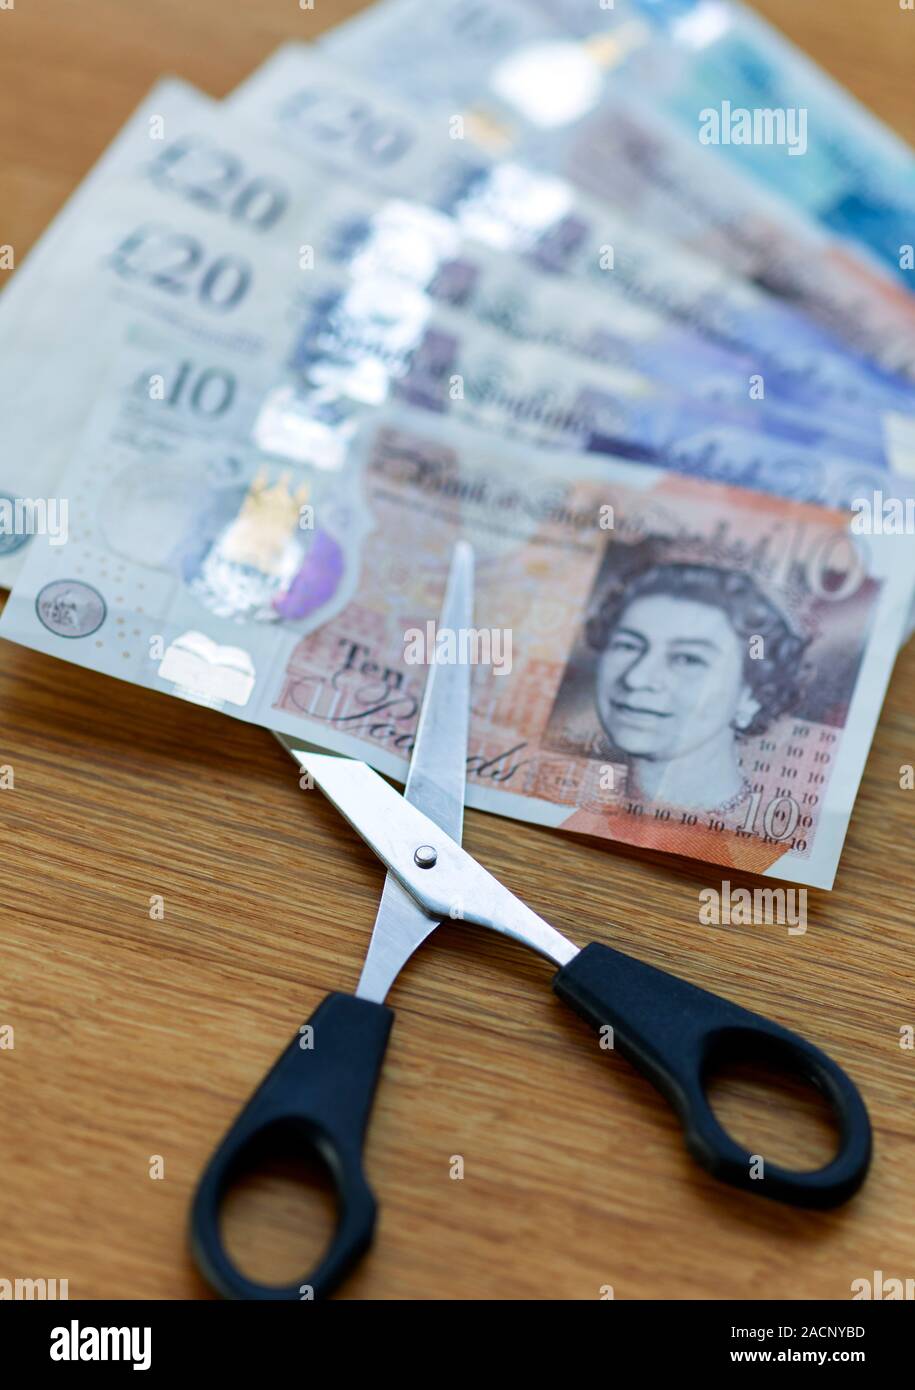 Concept of scissors cutting ten pound note Stock Photo